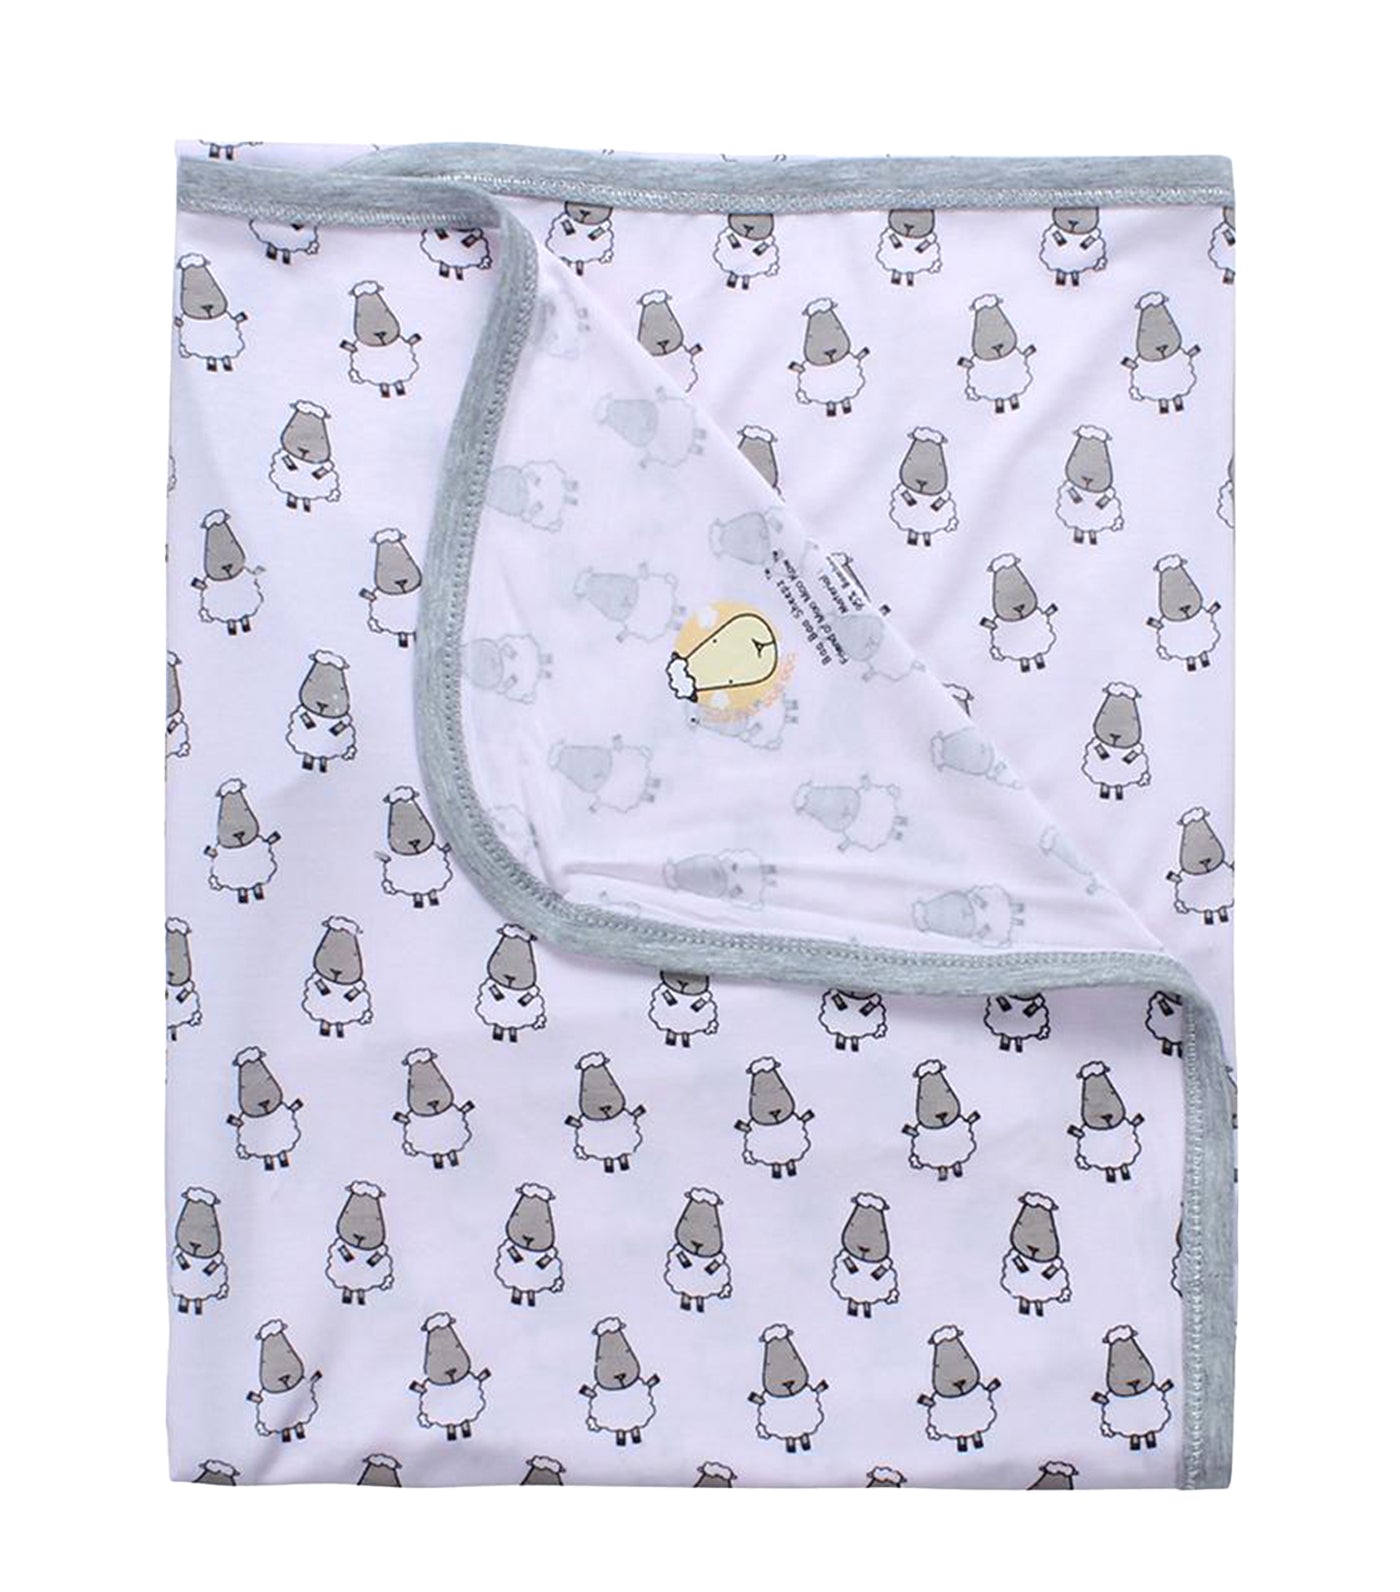 Single Layer Baby Blanket - Small Sheepz